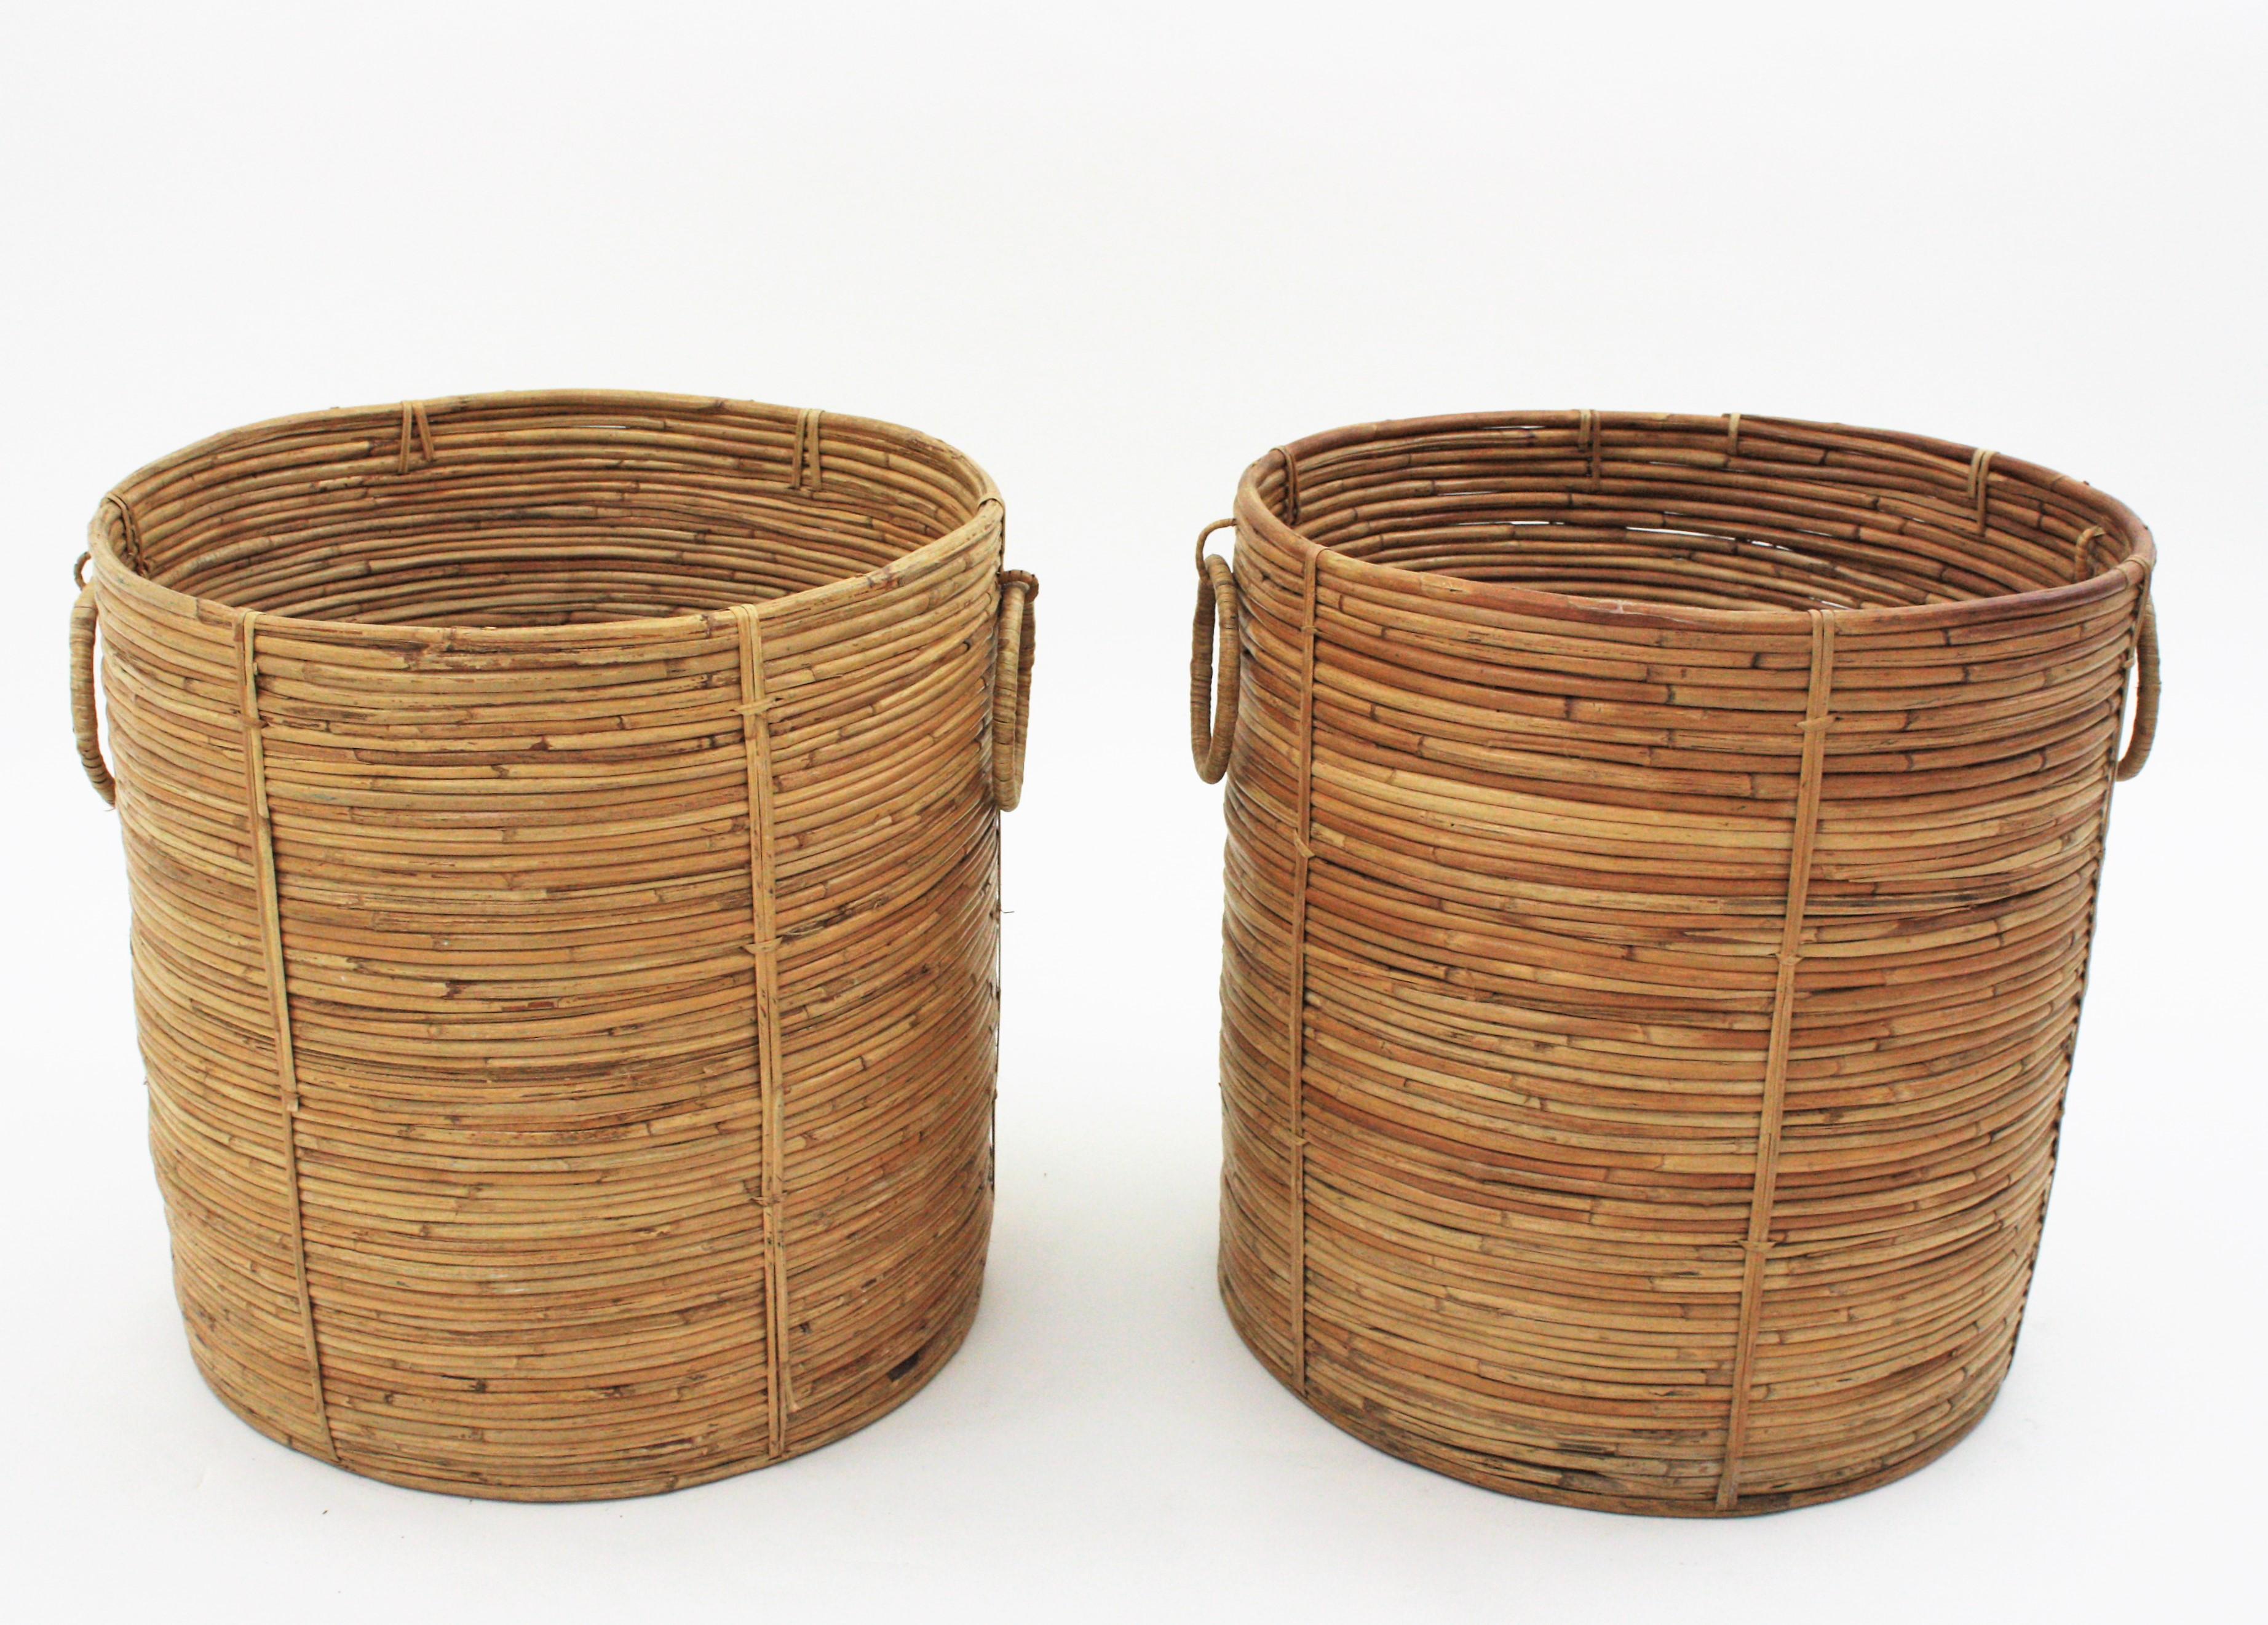 Italian Pair of Rattan Large Round Planters or Baskets with Ring Handles, 1970s